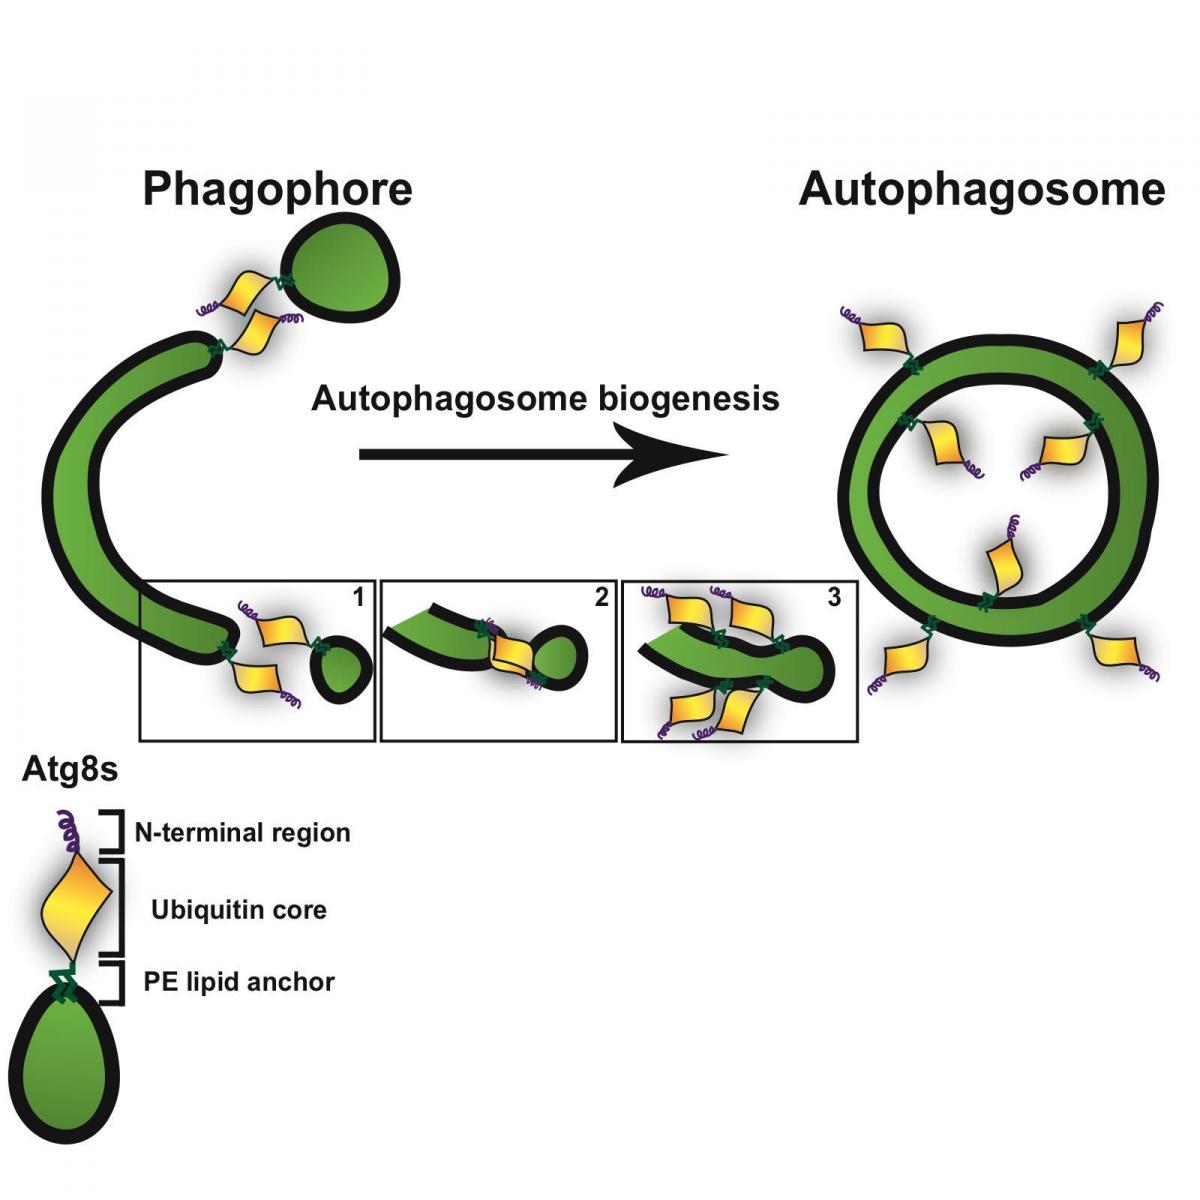 Early stages of autophagosome formation